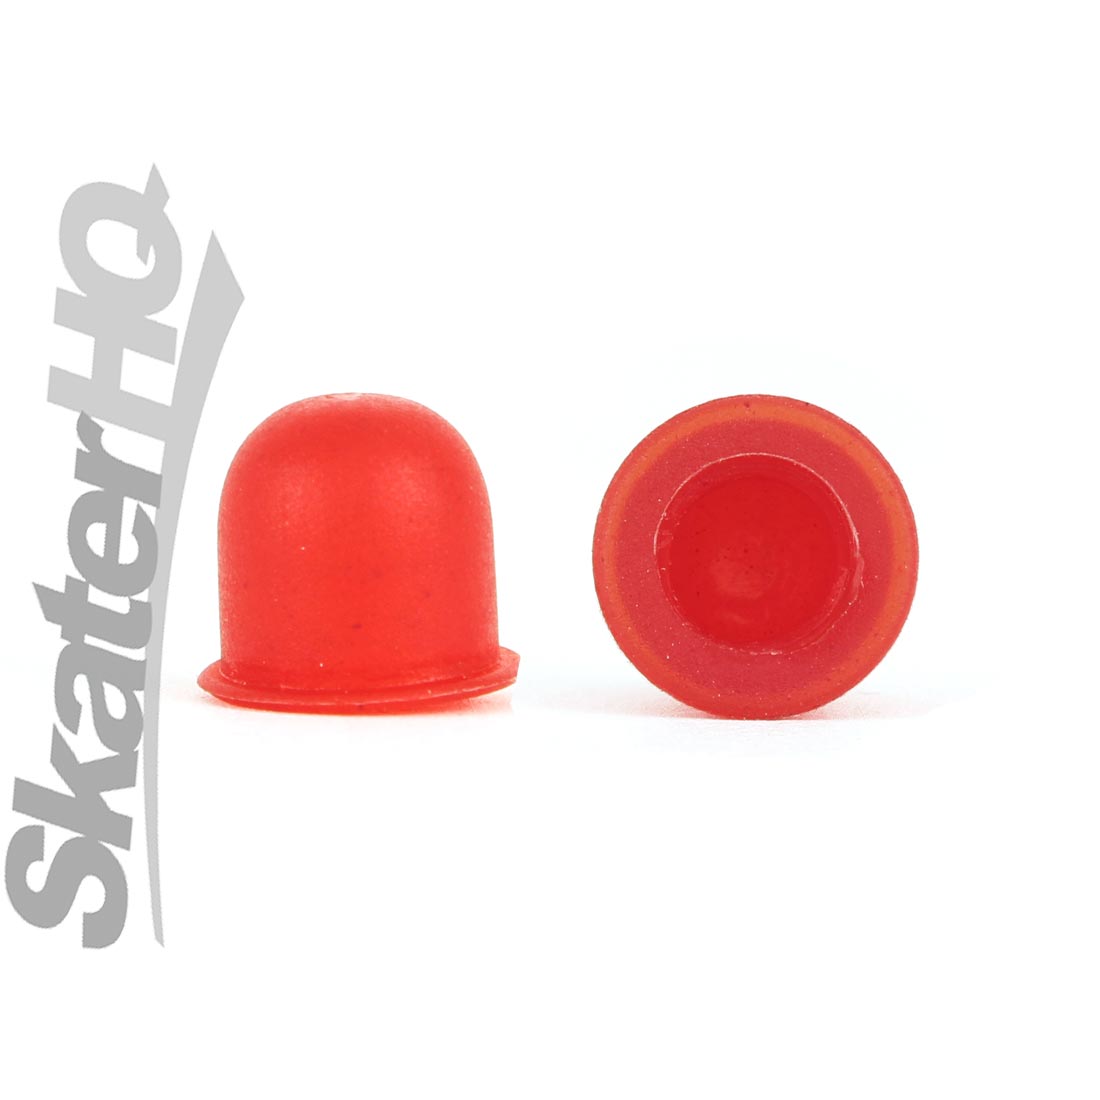 Crazy Pivot Cup PU - Red Roller Skate Wheels